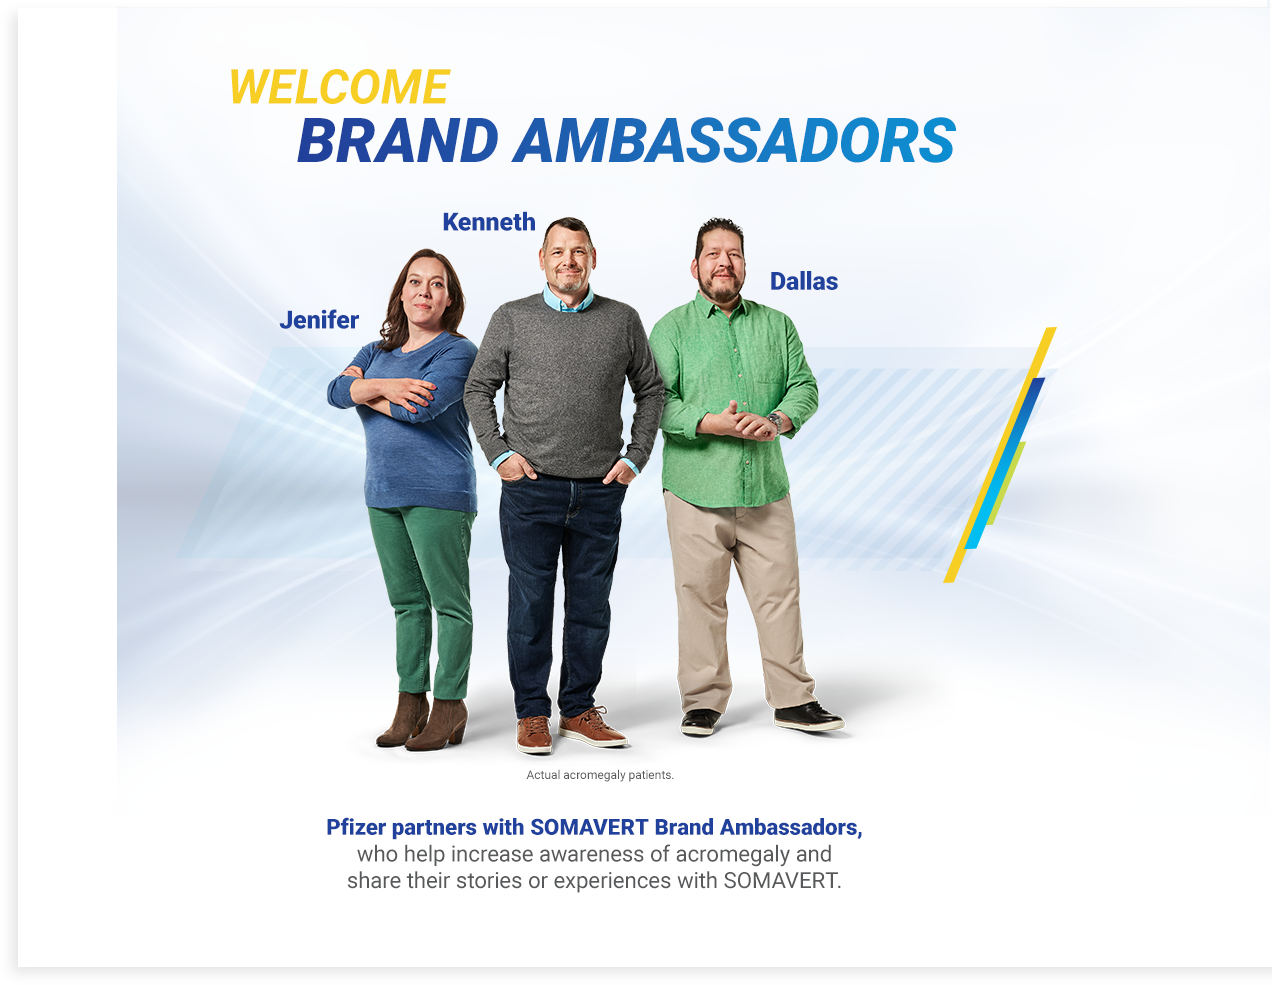 Jenifer, Kenneth, and Dallas actual acromegaly patients brand ambassador banner